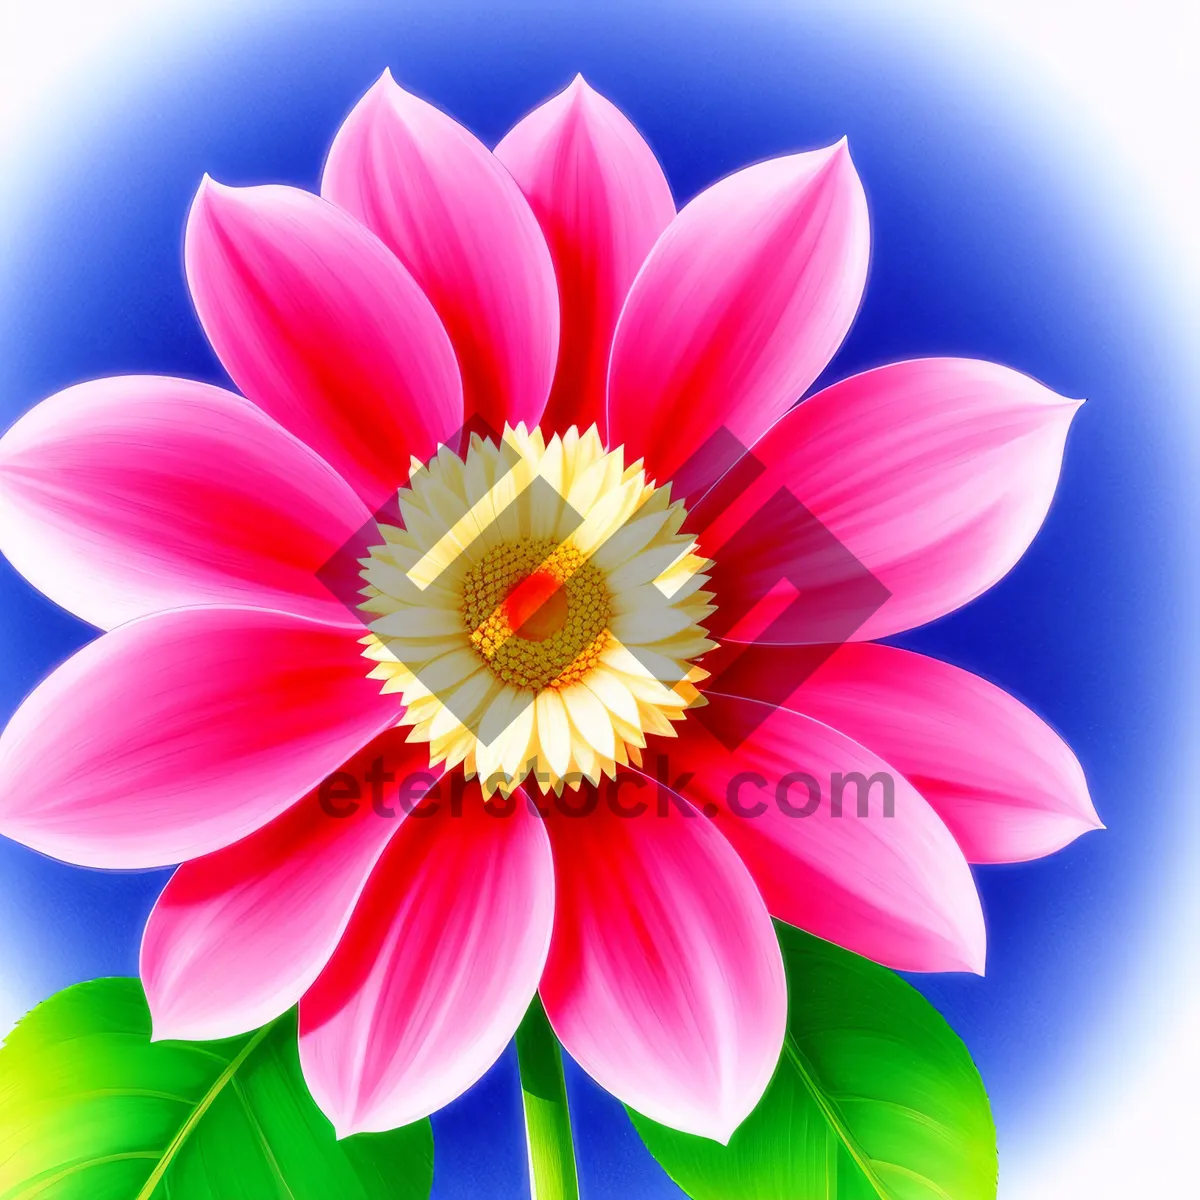 Picture of Bright Pink Floral Blossom: Summer Love